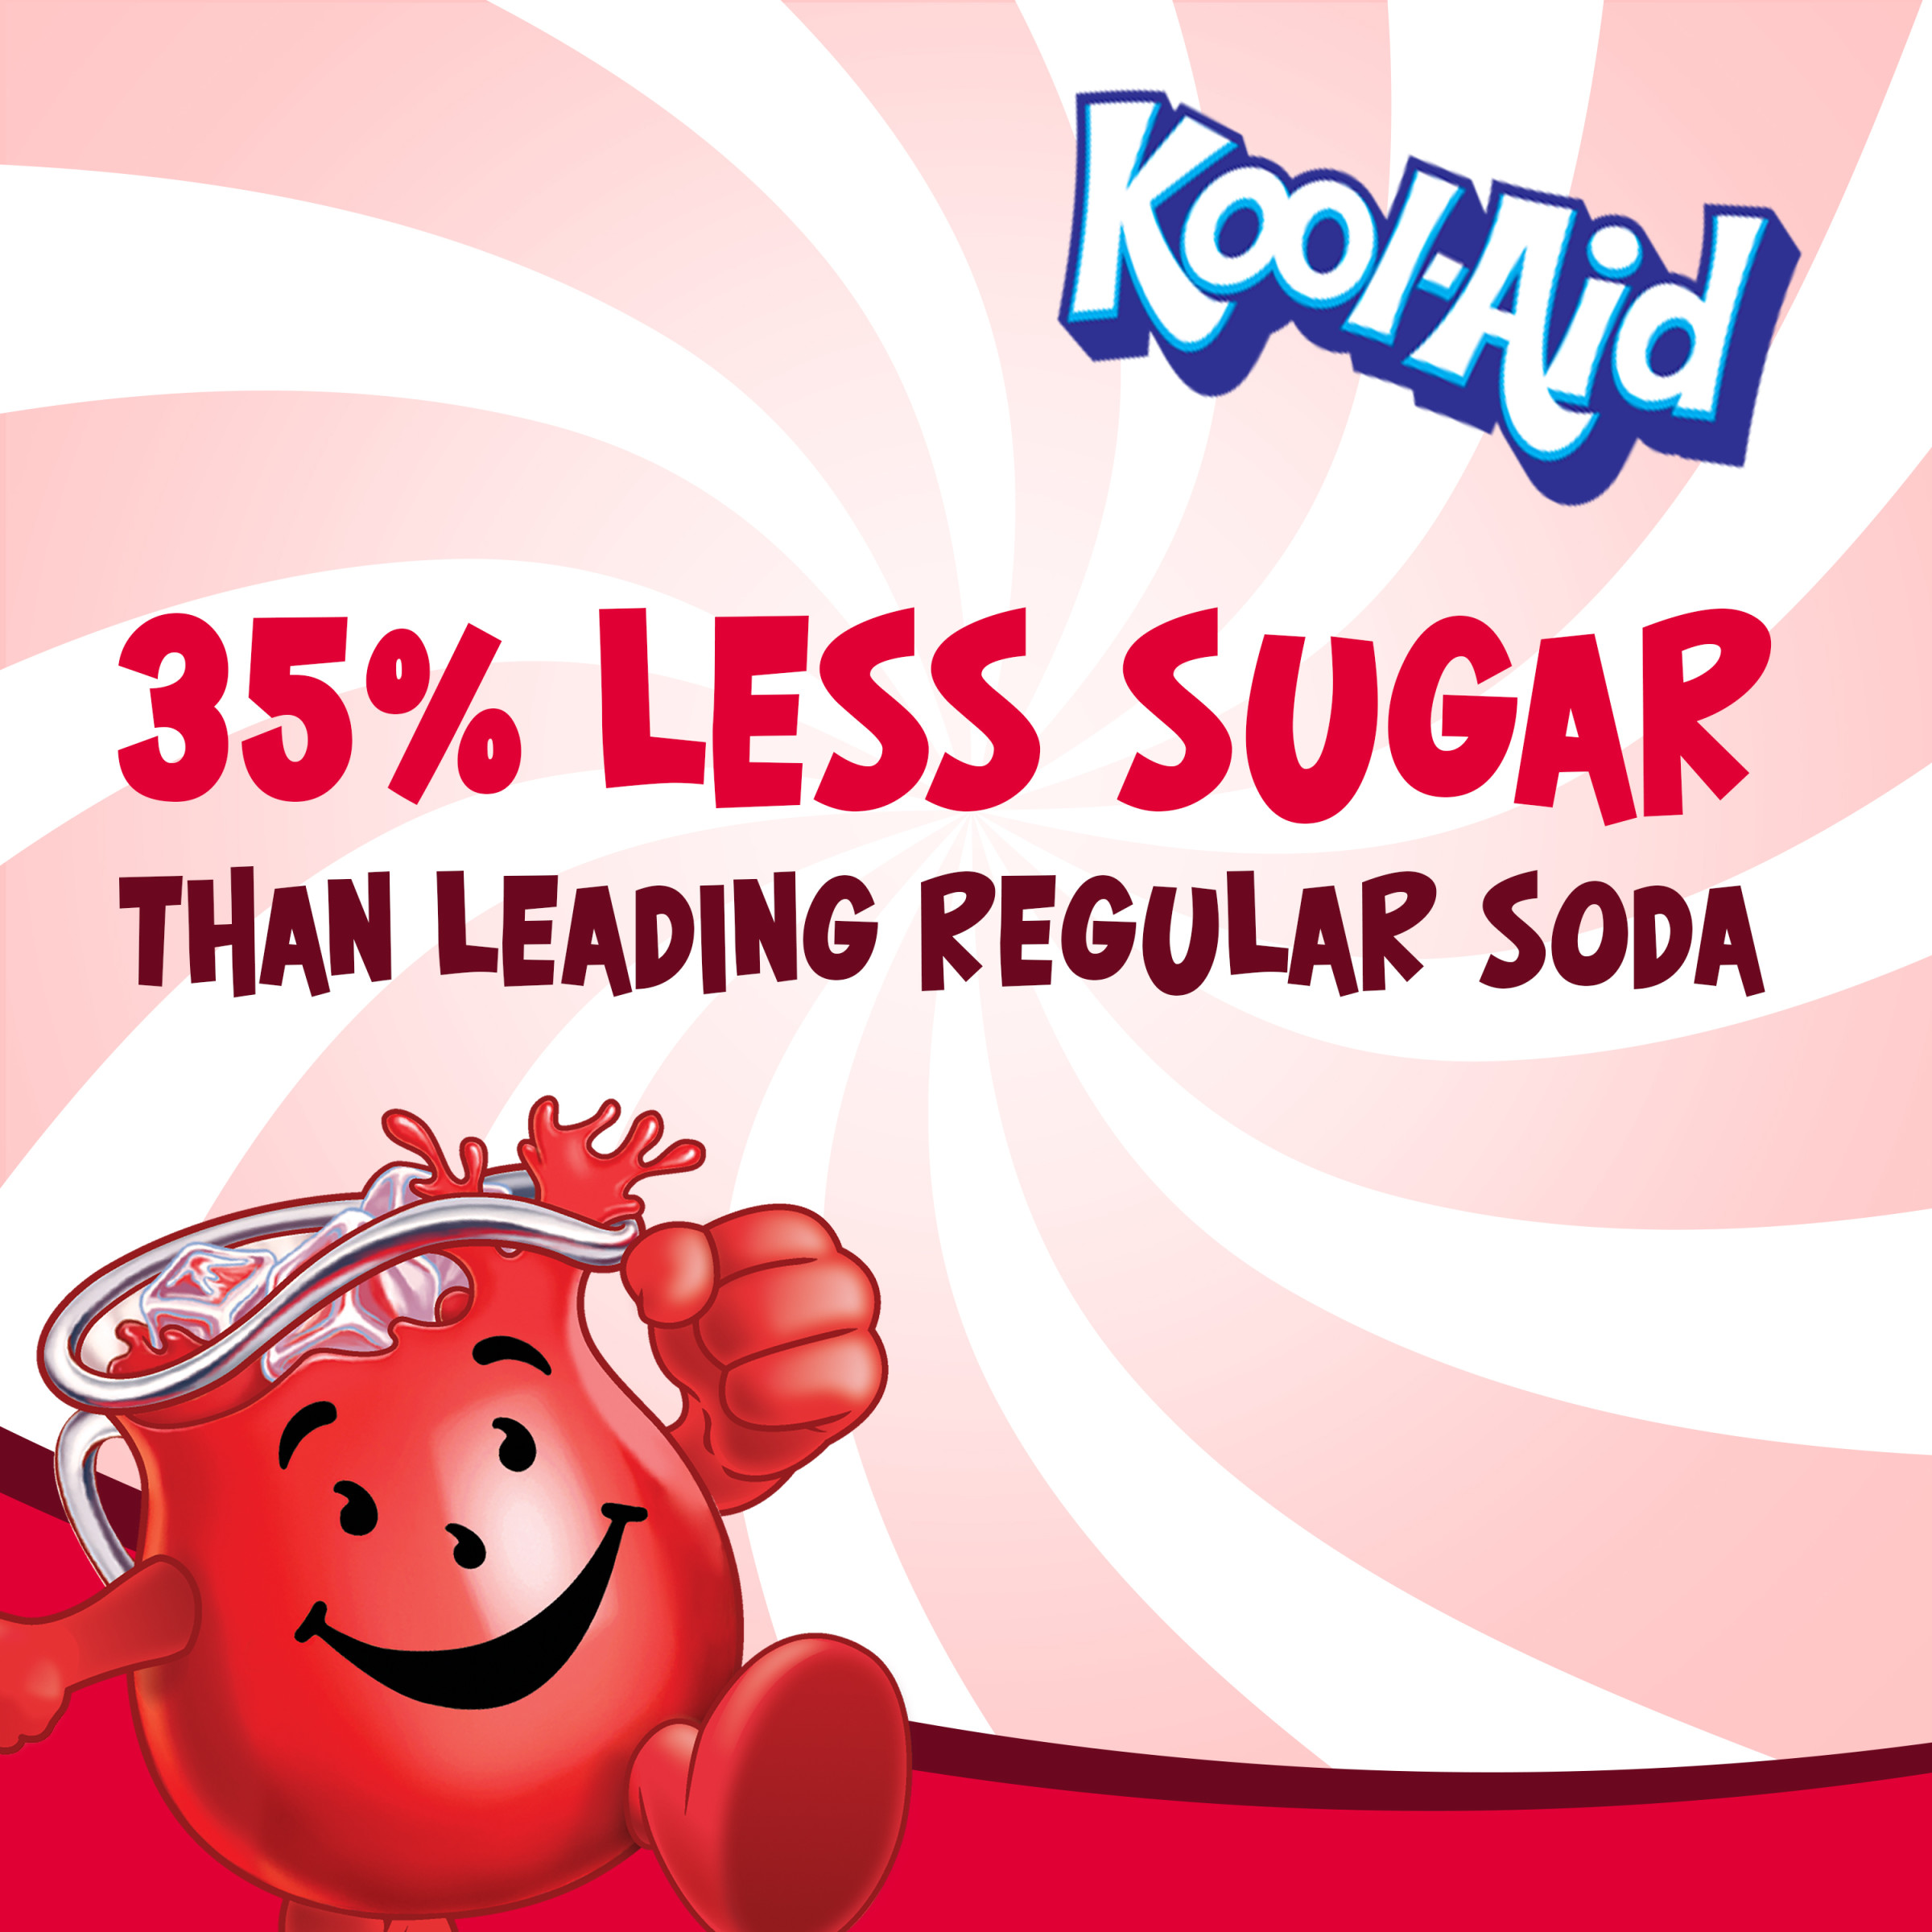 Kool-Aid Sugar-Sweetened Cherry Artificially Flavored Powdered